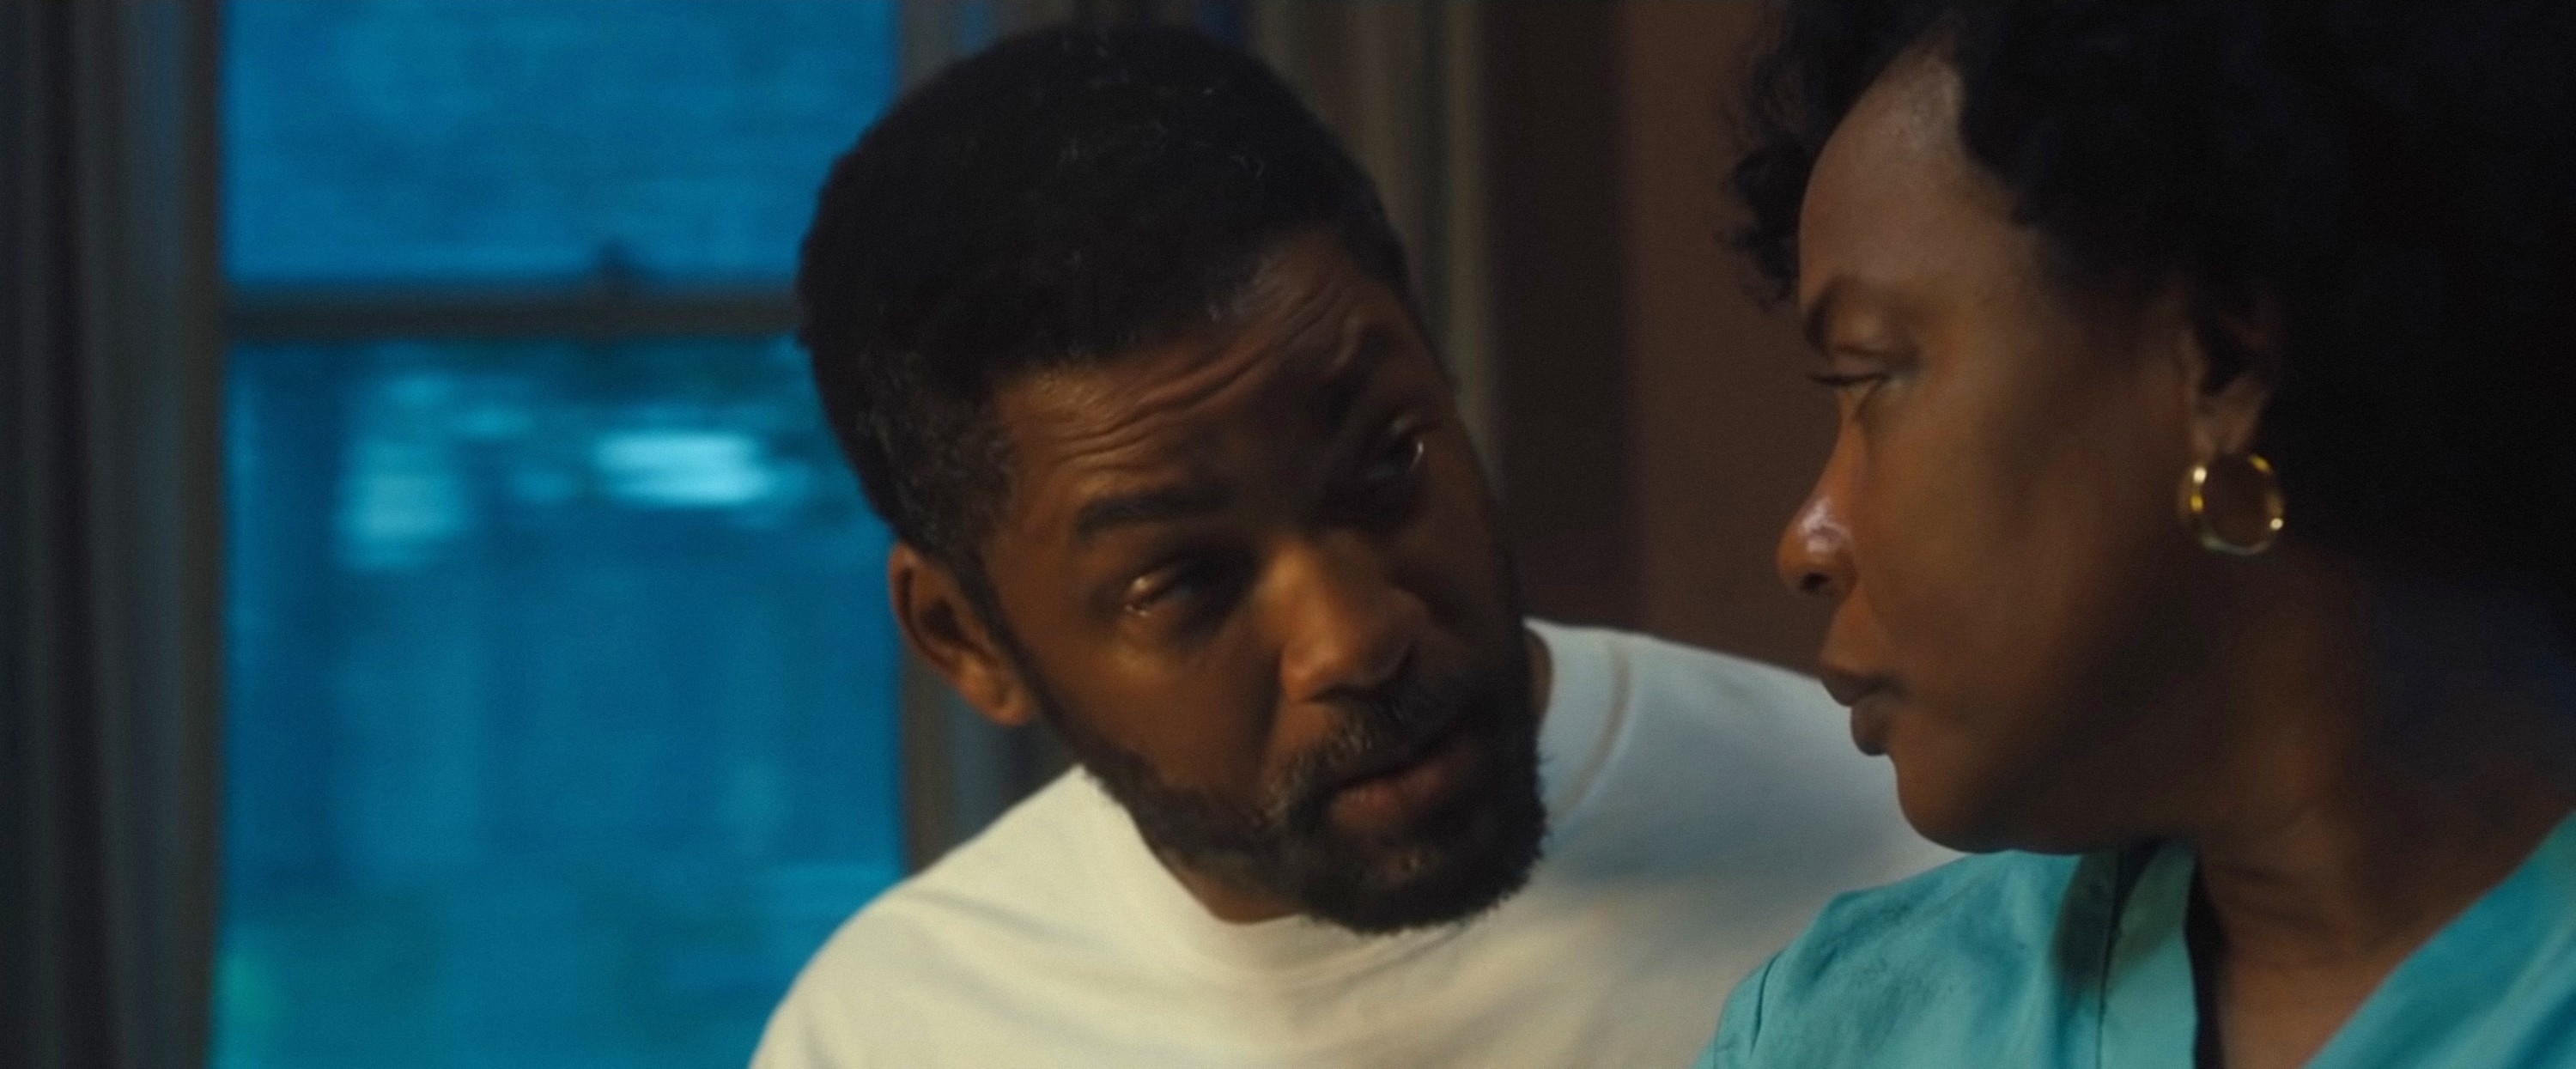 Will Smith and Aunjanue Ellis-Taylor in a tense scene from the film King Richard